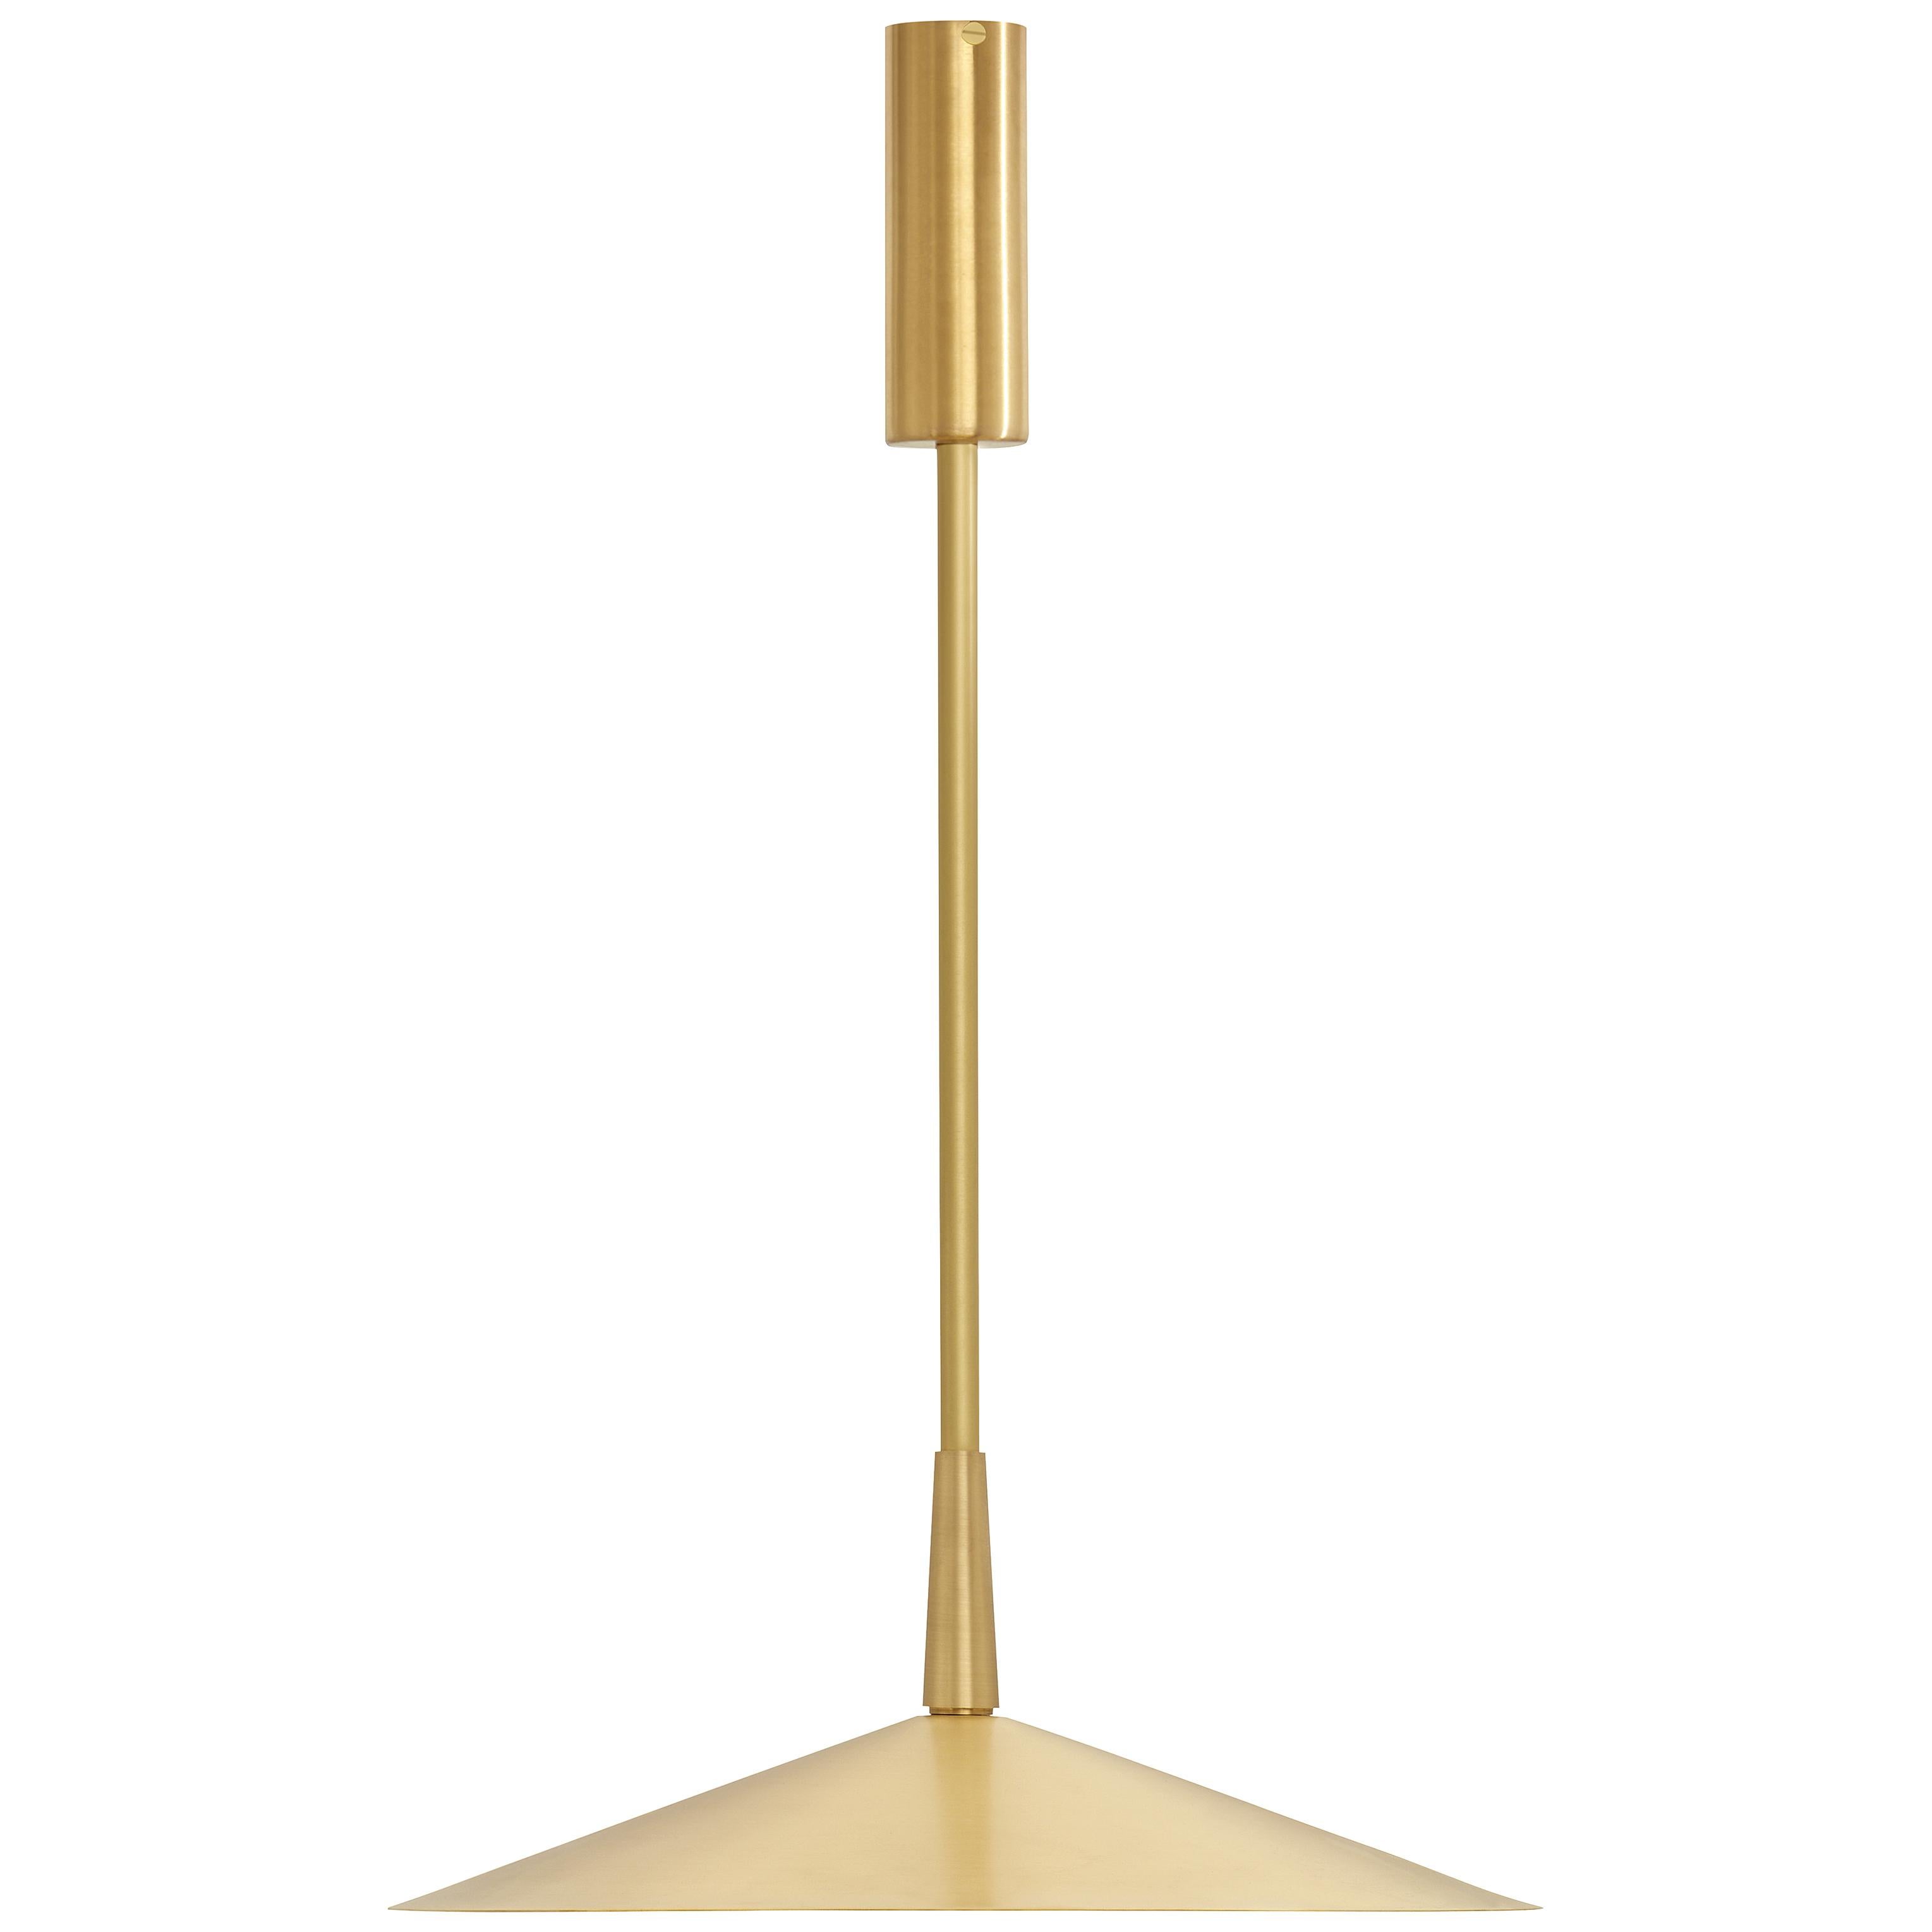 Tinto small pendant by CTO Lighting
Materials: satin brass 
Also available in dark bronze shade and finial with satin brass drop rod and ceiling rose
satin brass shade and finial with dark bronze drop rod and ceiling rose
all dark bronze
all